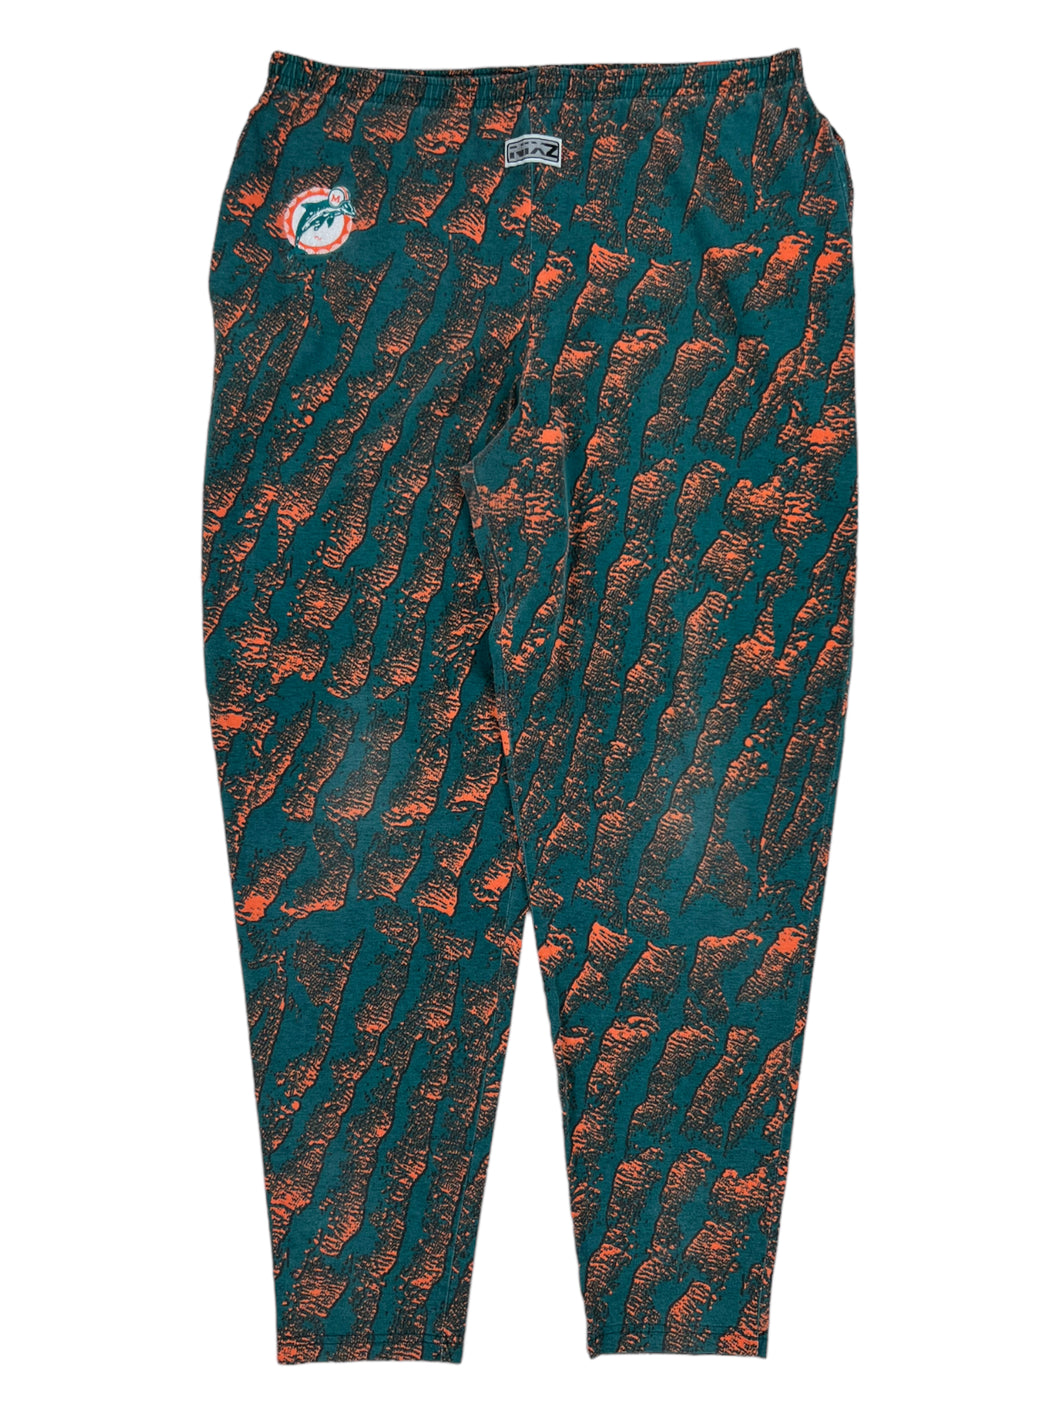 Vintage 90s Miami Dolphins all over print NFL pants (L/XL)